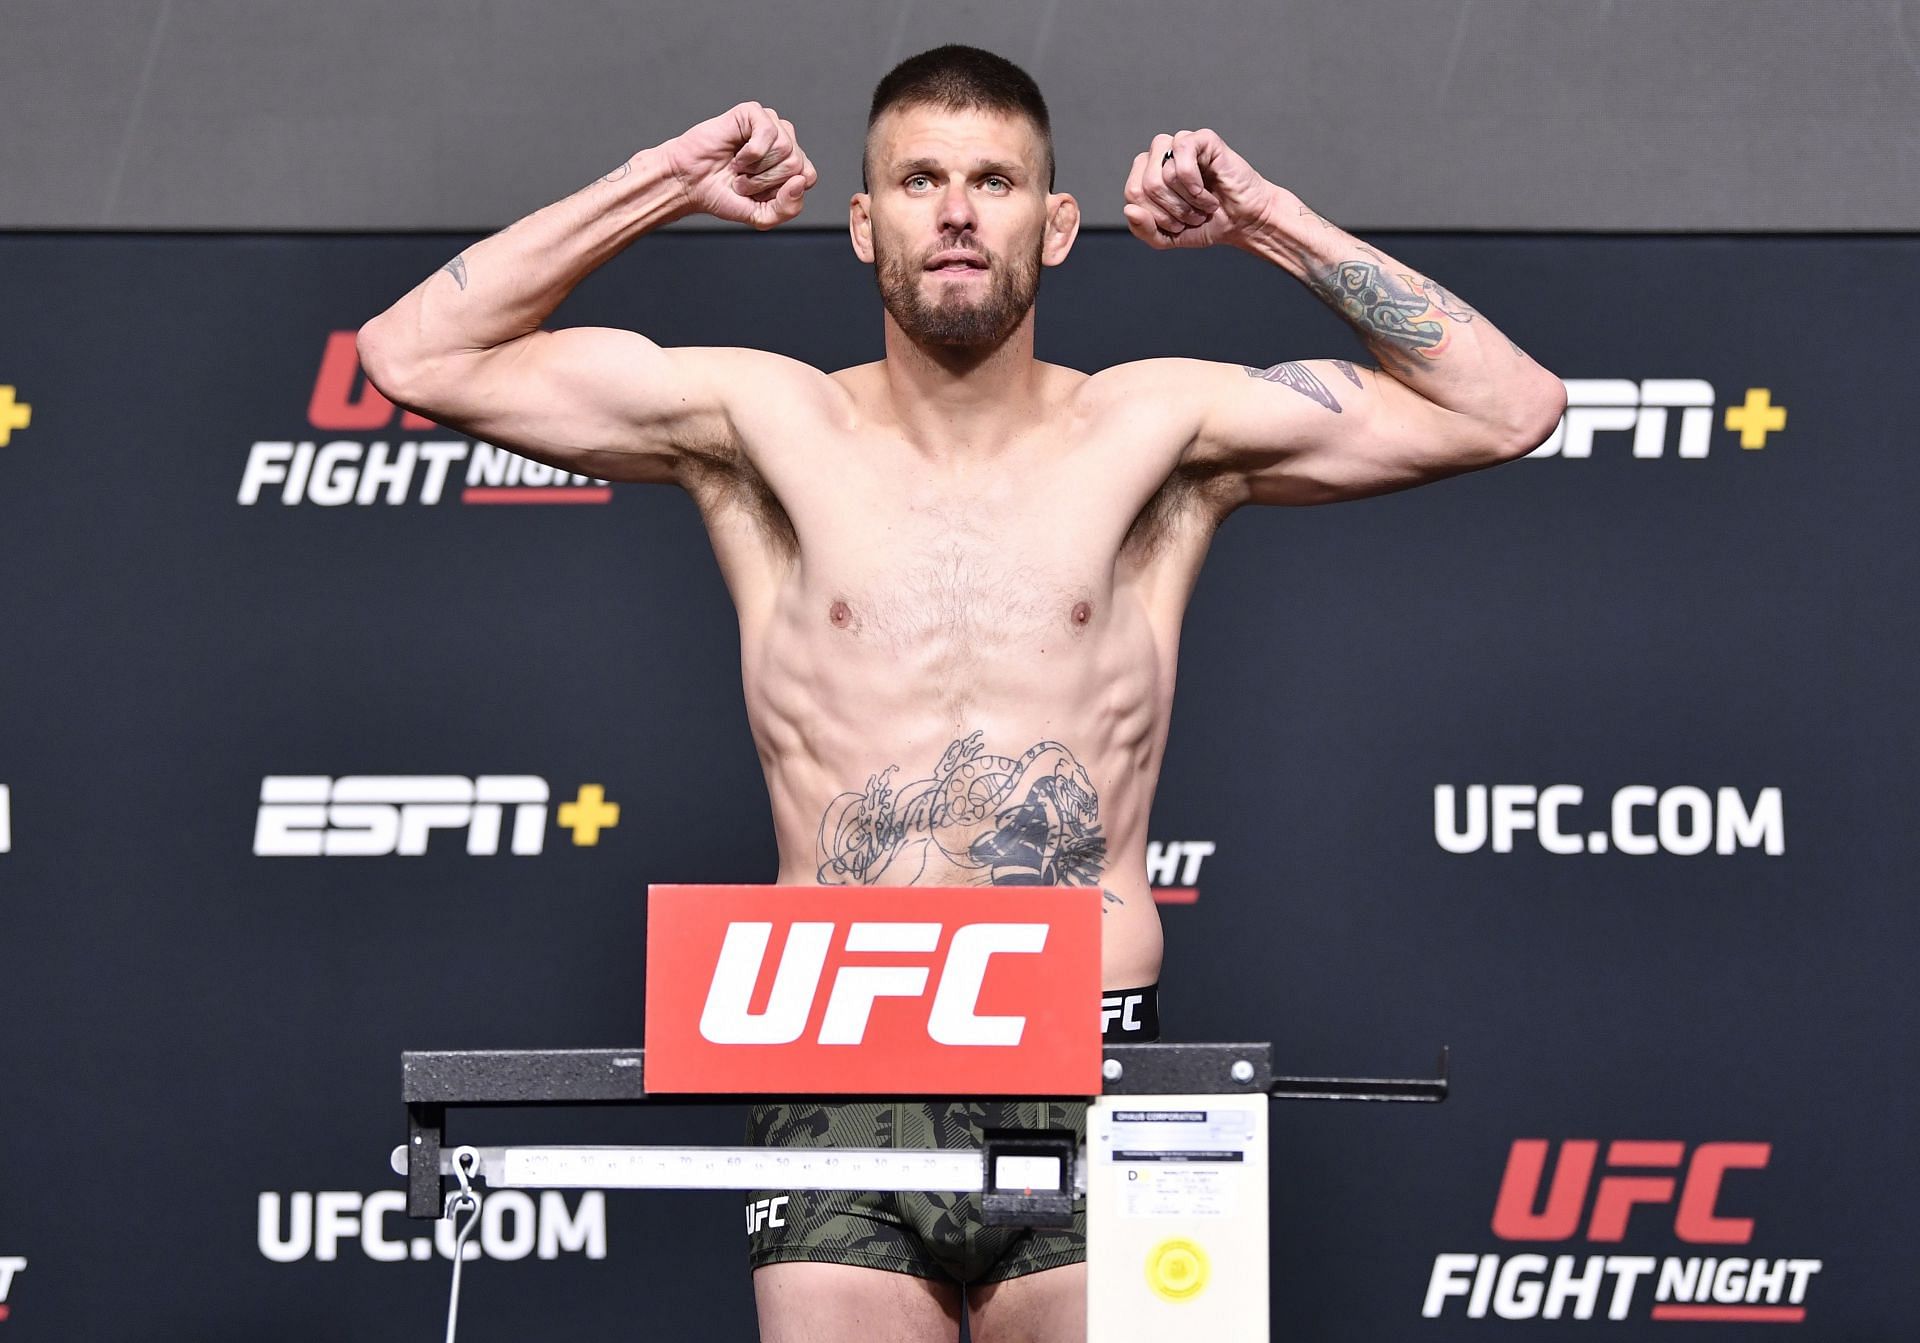 Means at the UFC Fight Night: Gane vs. Volkov Weigh-in